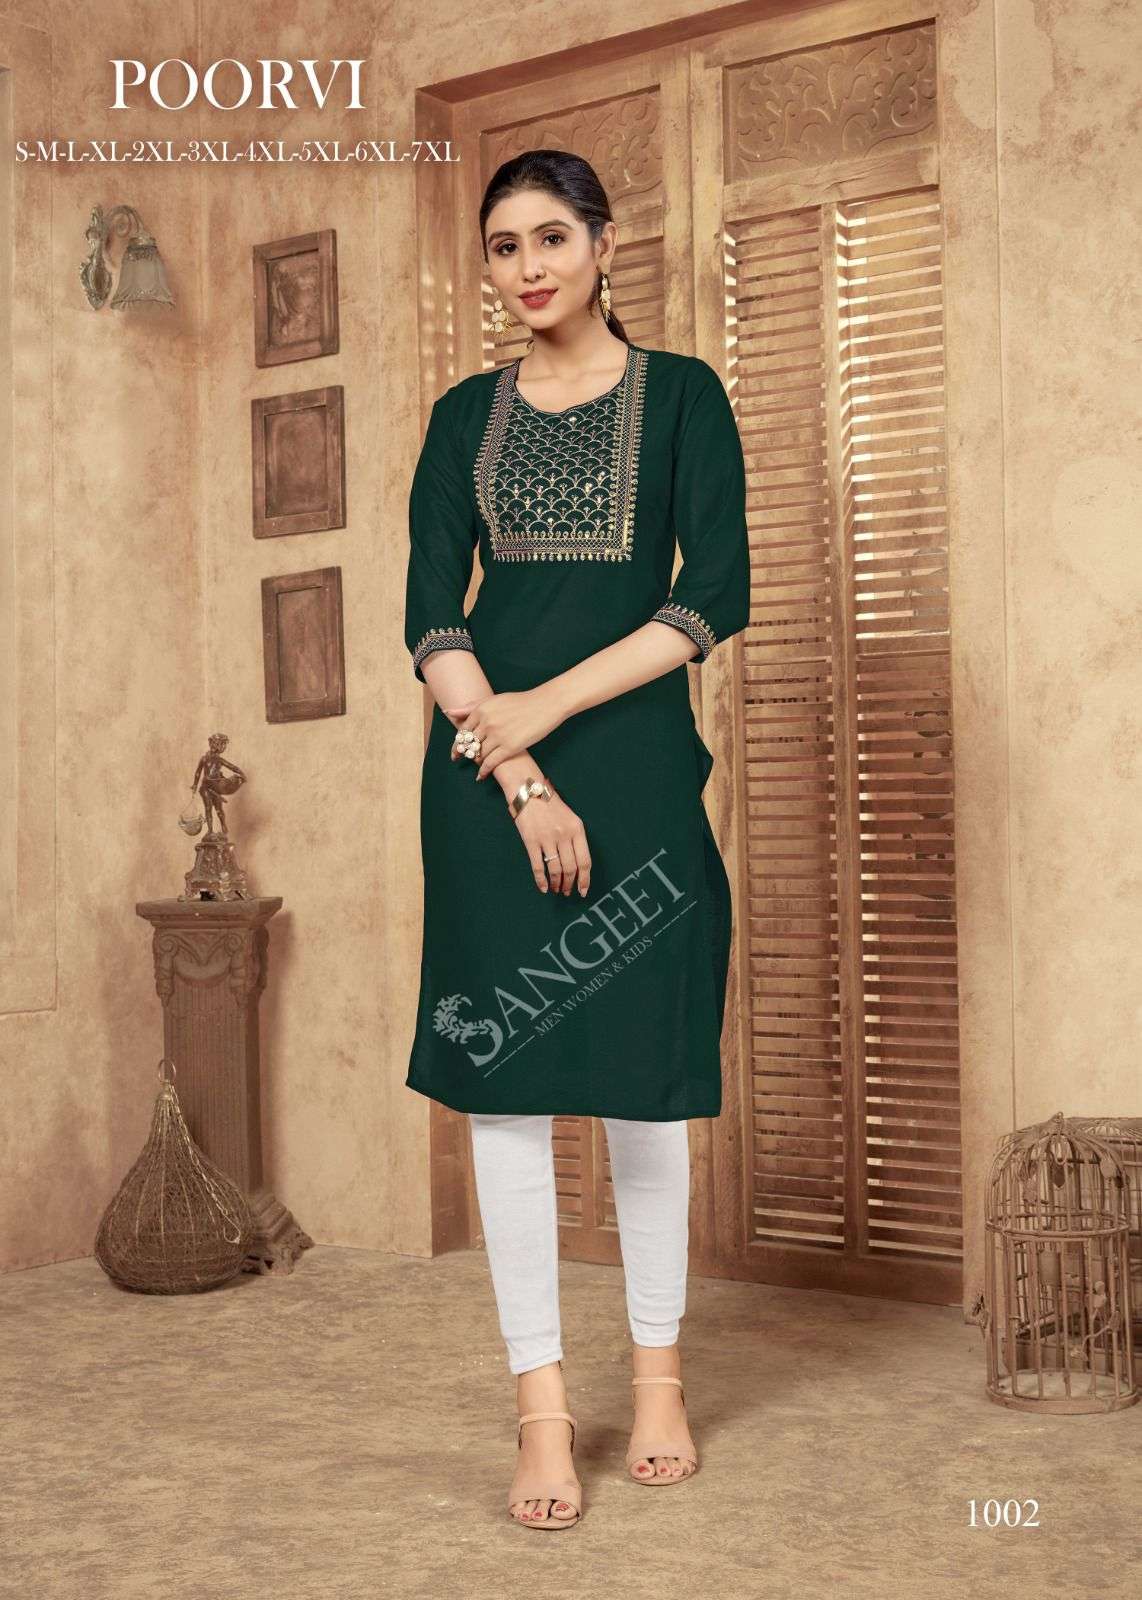 poorvi heavy rayon with embroidery sequence work dresigner kurti wholesale 2 2023 11 04 14 28 33